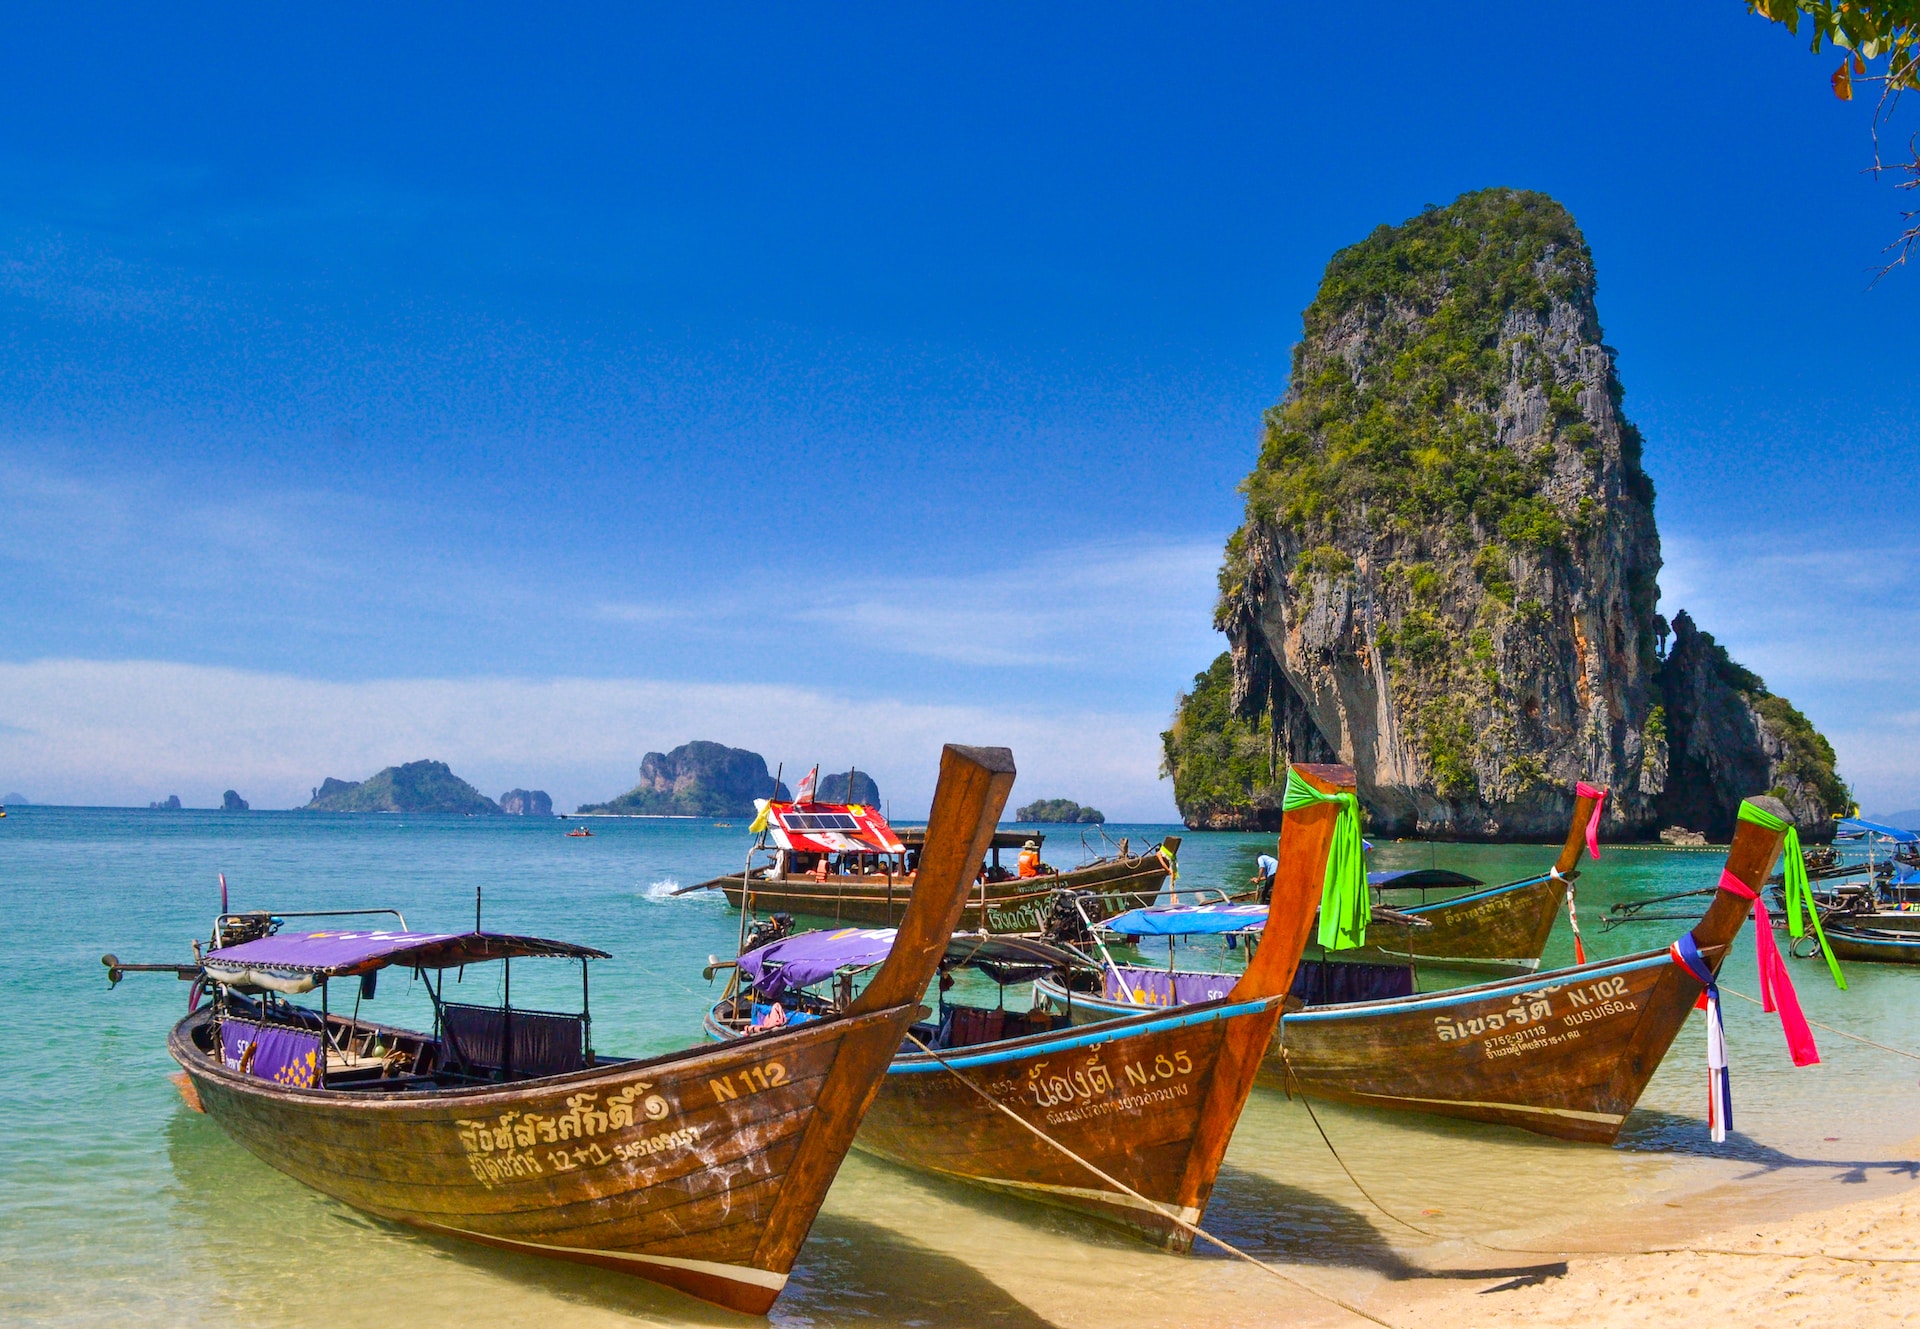 Binance’s Thailand Unit Receives Regulator Approval to Operate in the Country